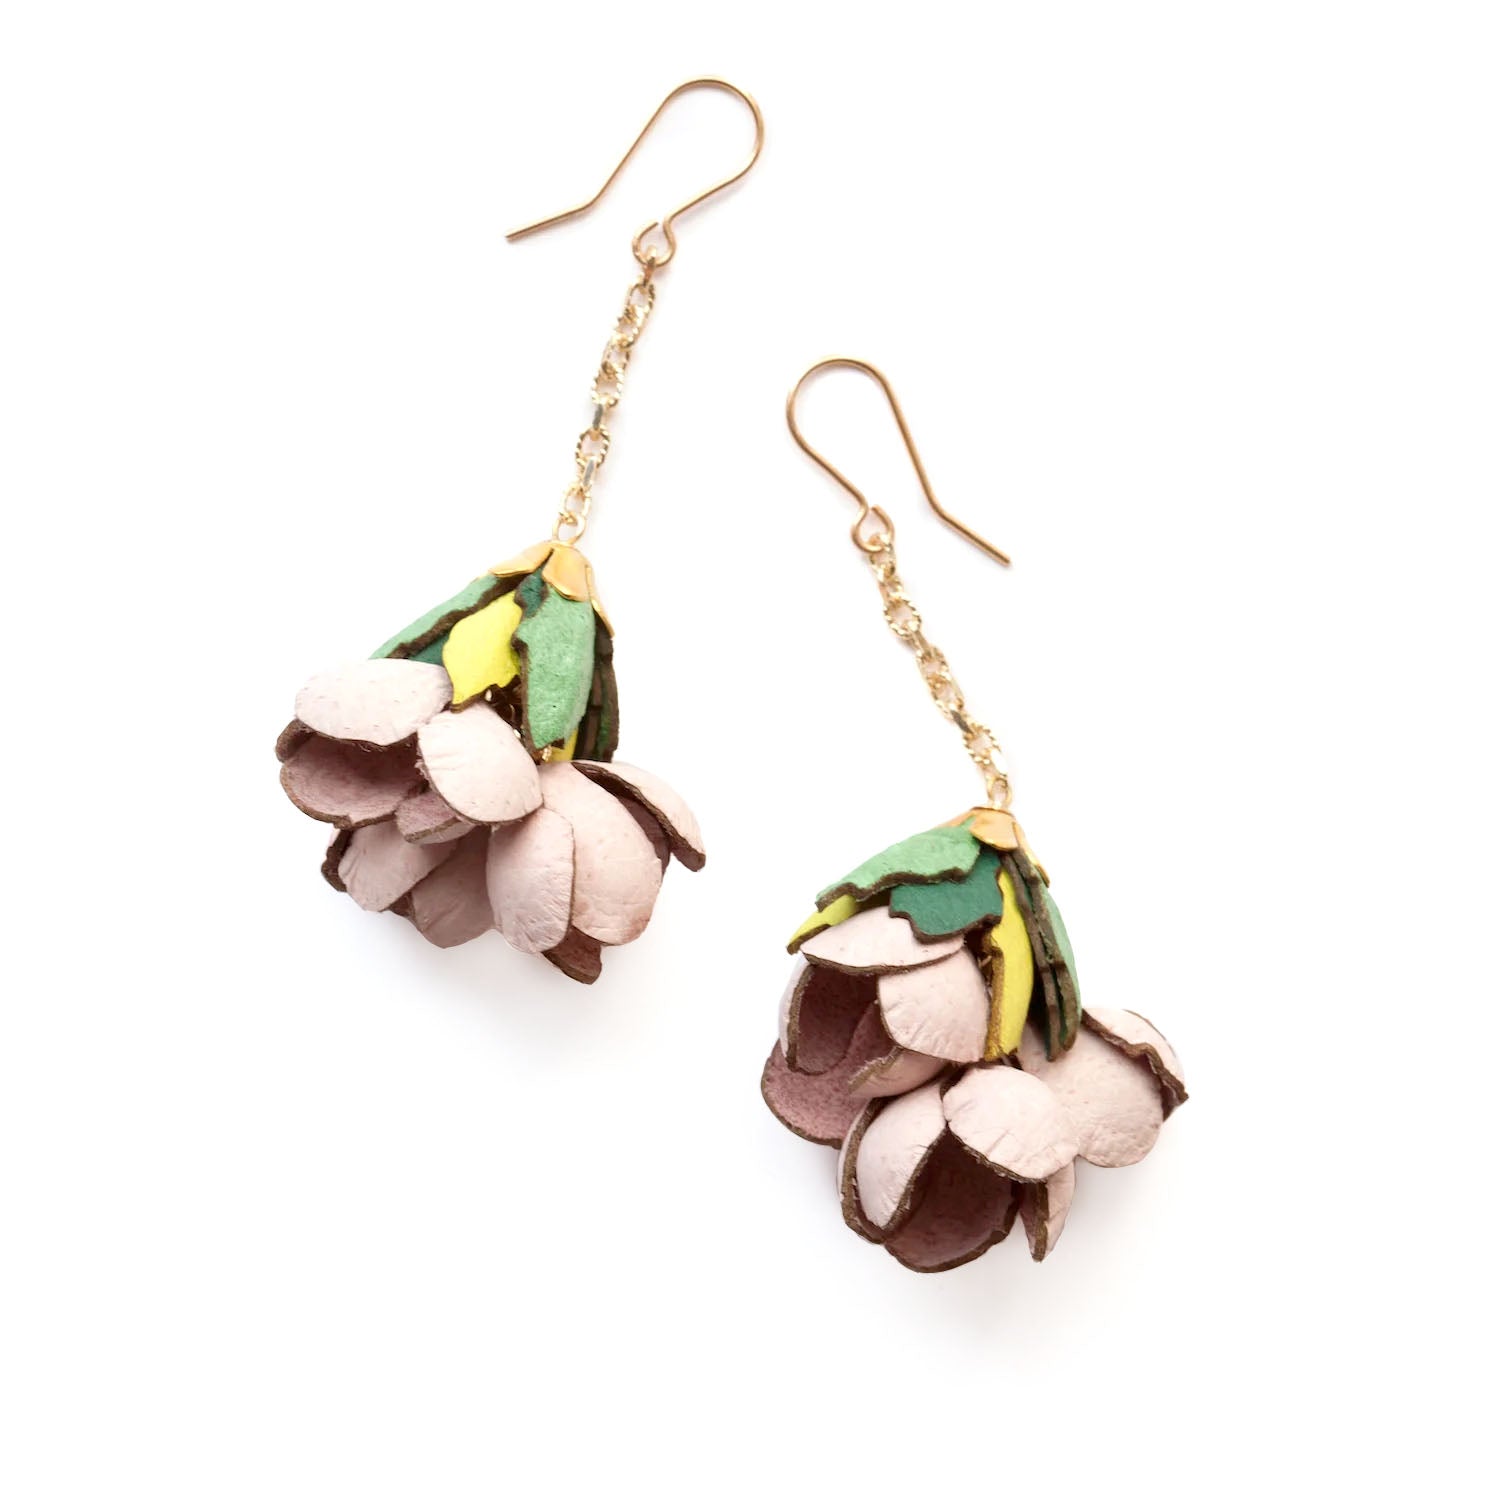 soft leather flower bud blossom earrings in palest pink, with green leaves on gold anchor cut chain & hooks.